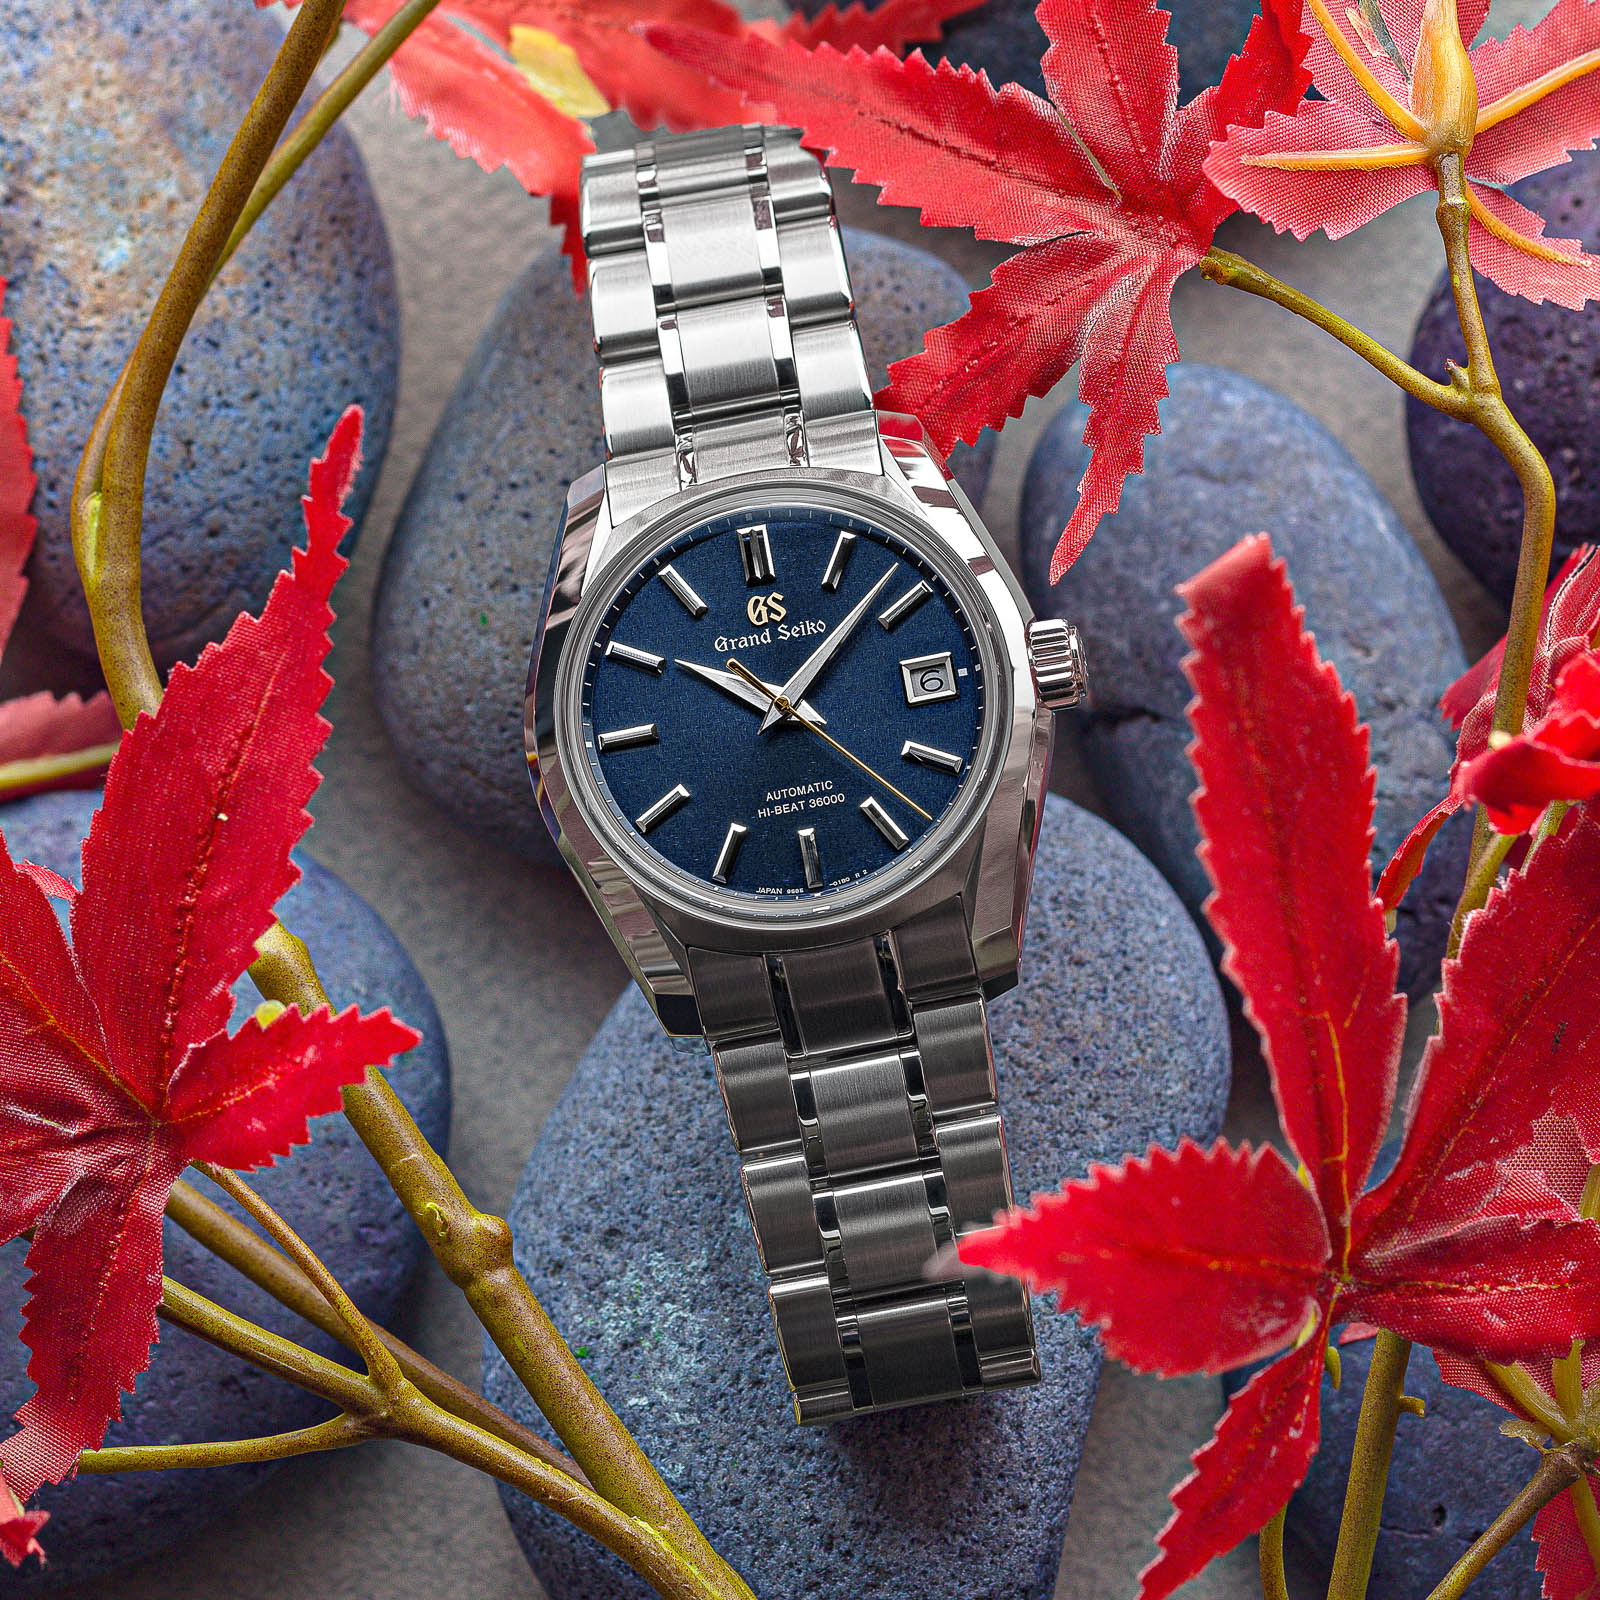 Stainless steel wristwatch with a blue textured dial. 